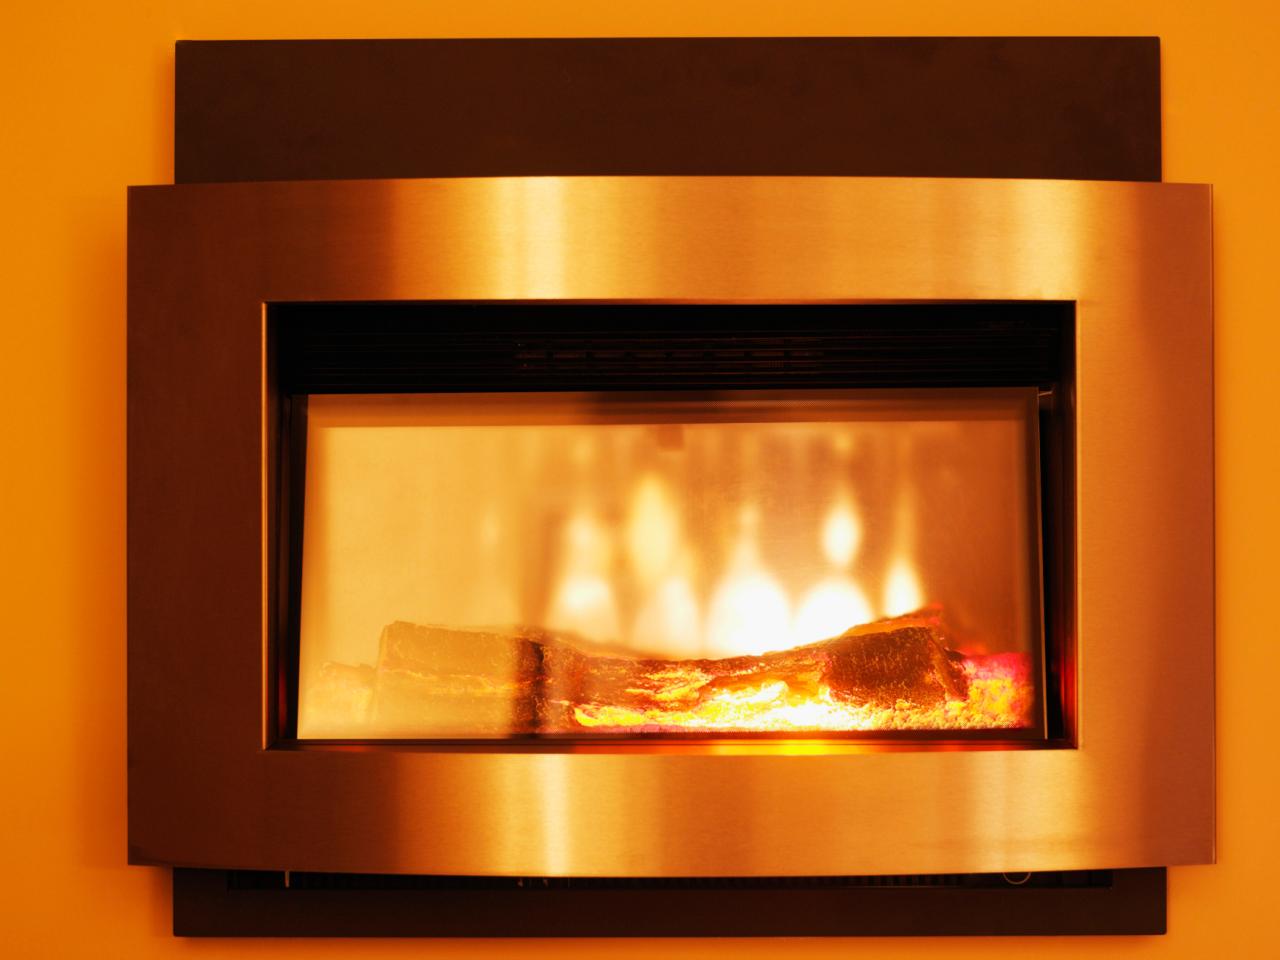 HGTVRemodels outlines the advantages of gas fireplaces. Learn more on HGTV.com.